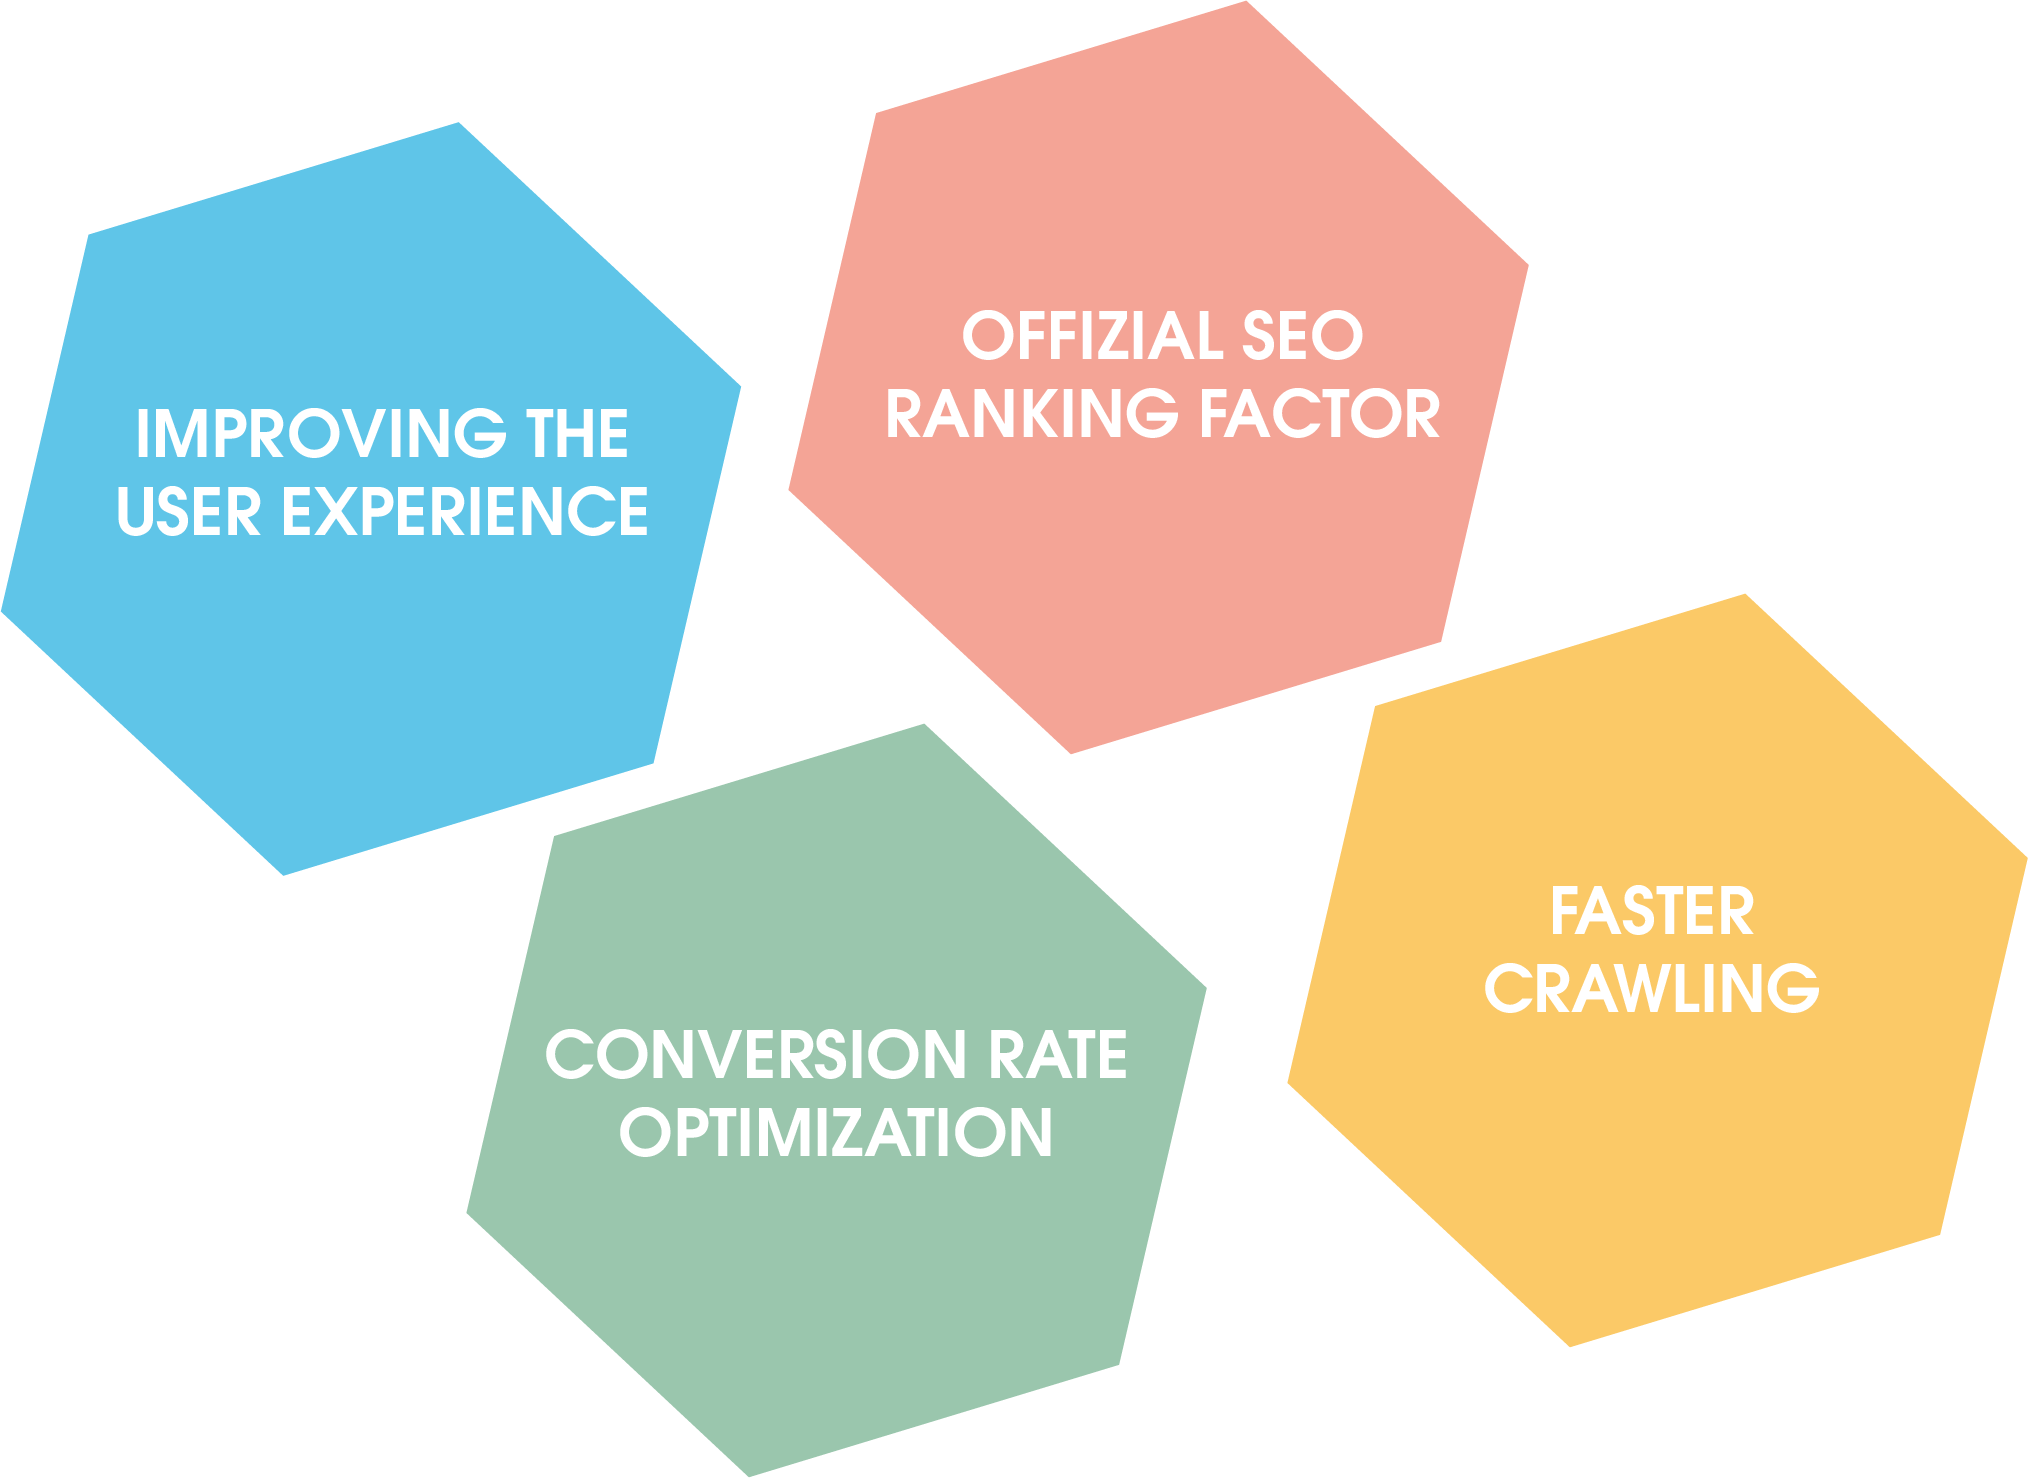 In summary: Here's what optimizing your page speed will bring you:
1. Improvement of the user experience
2. Optimization of the conversion rate
3. Official SEO ranking factor
4. Faster crawling